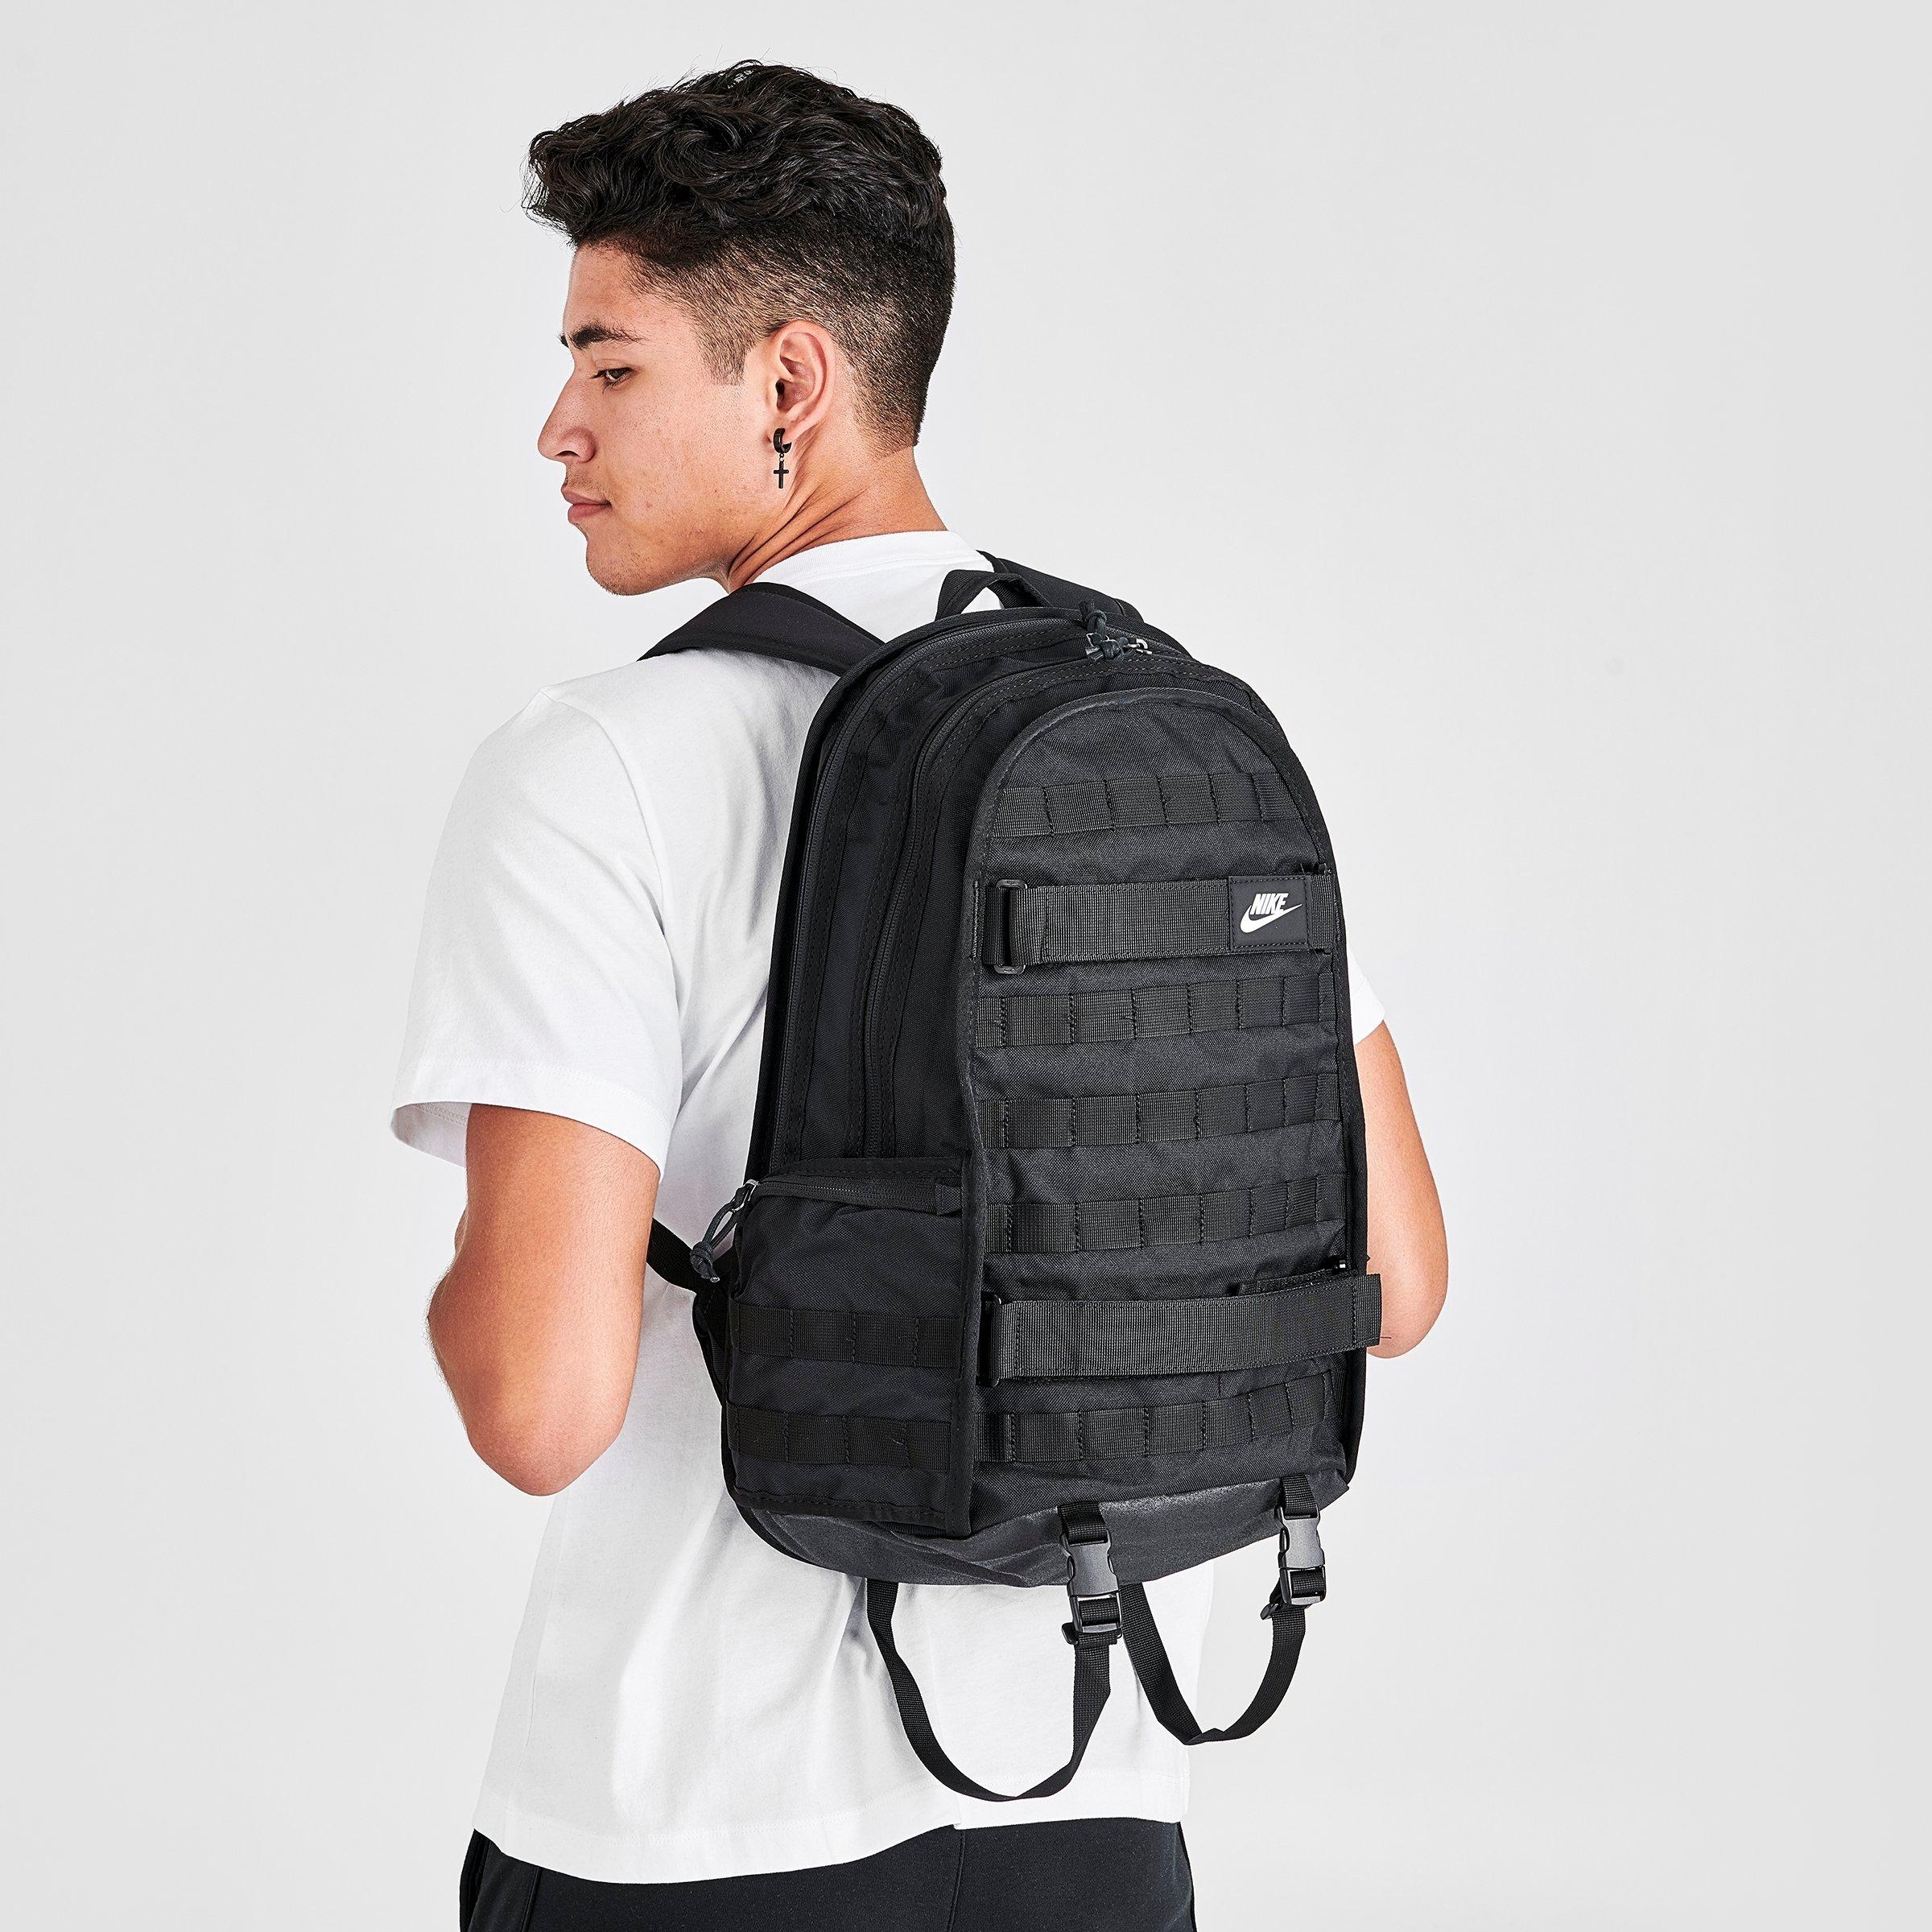 rpm backpack